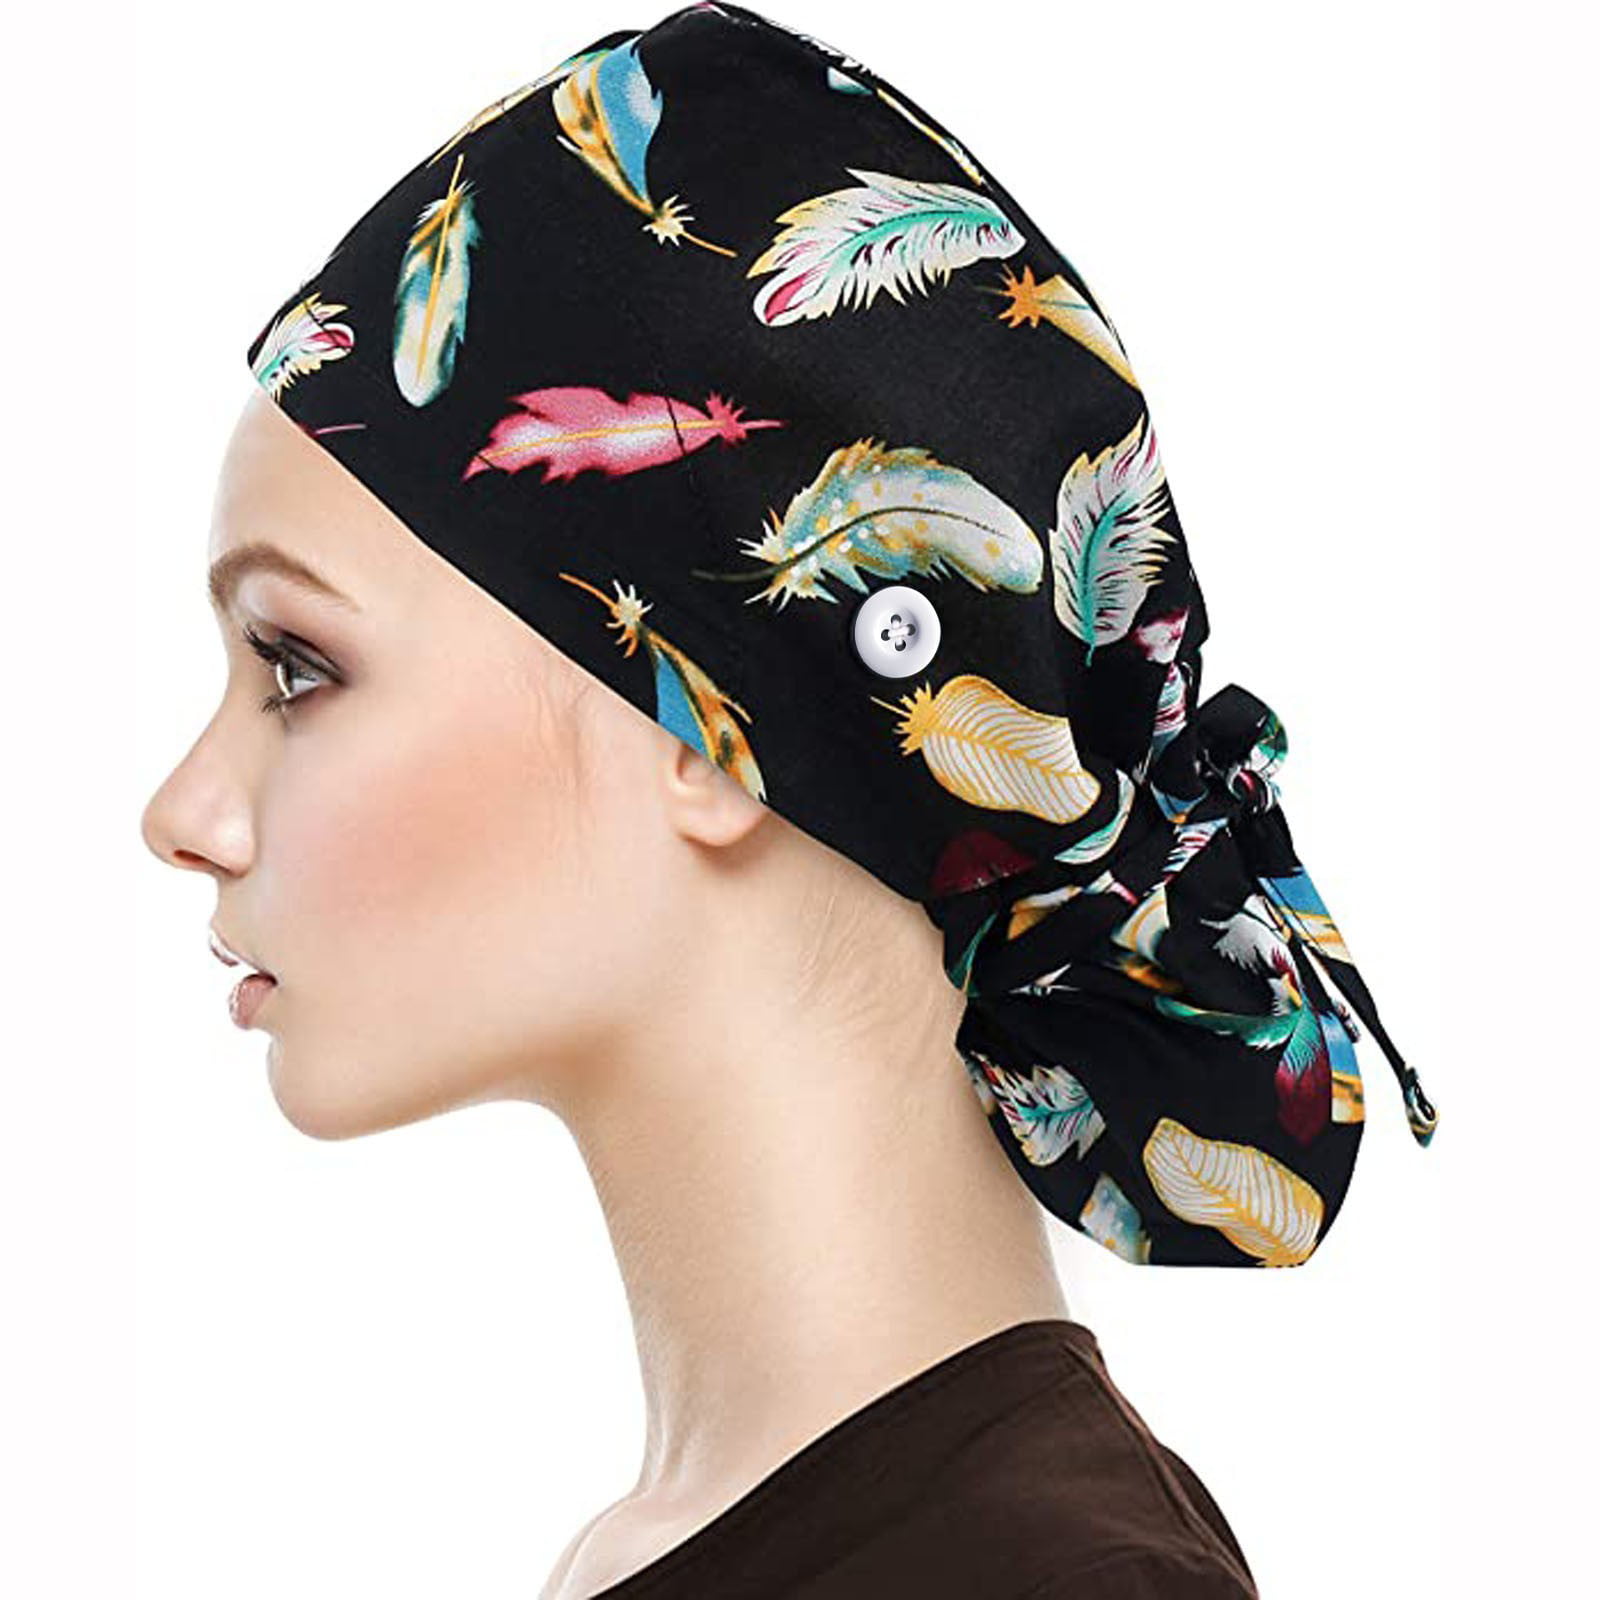 Adjustable and Breathable Bouffant Hats Headwear for Women Men CLIFIX Working Caps with Buttons and Sweatband